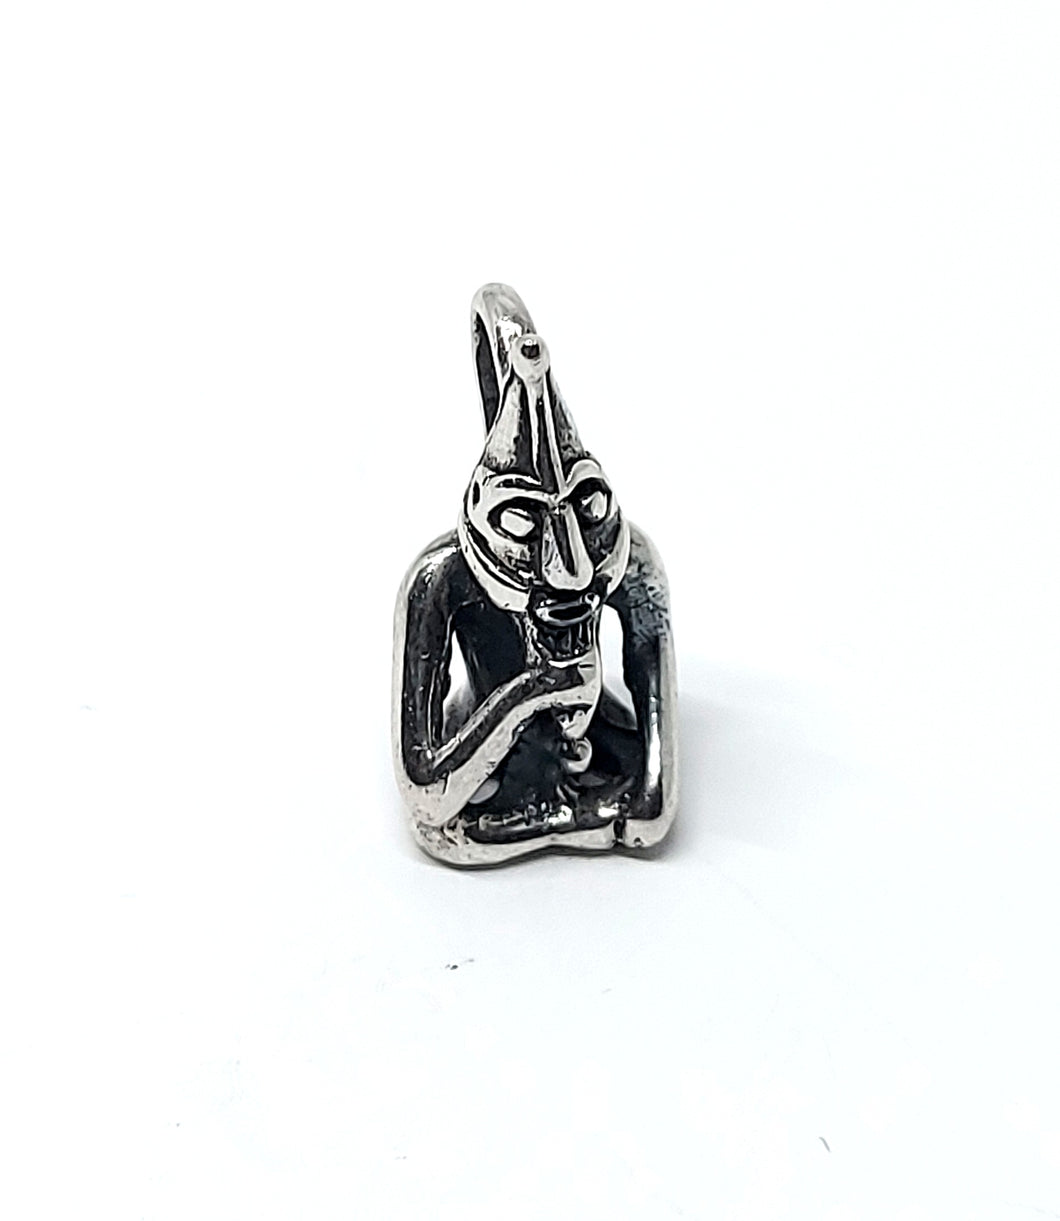 Pendant with Frej in sterling silver (925)